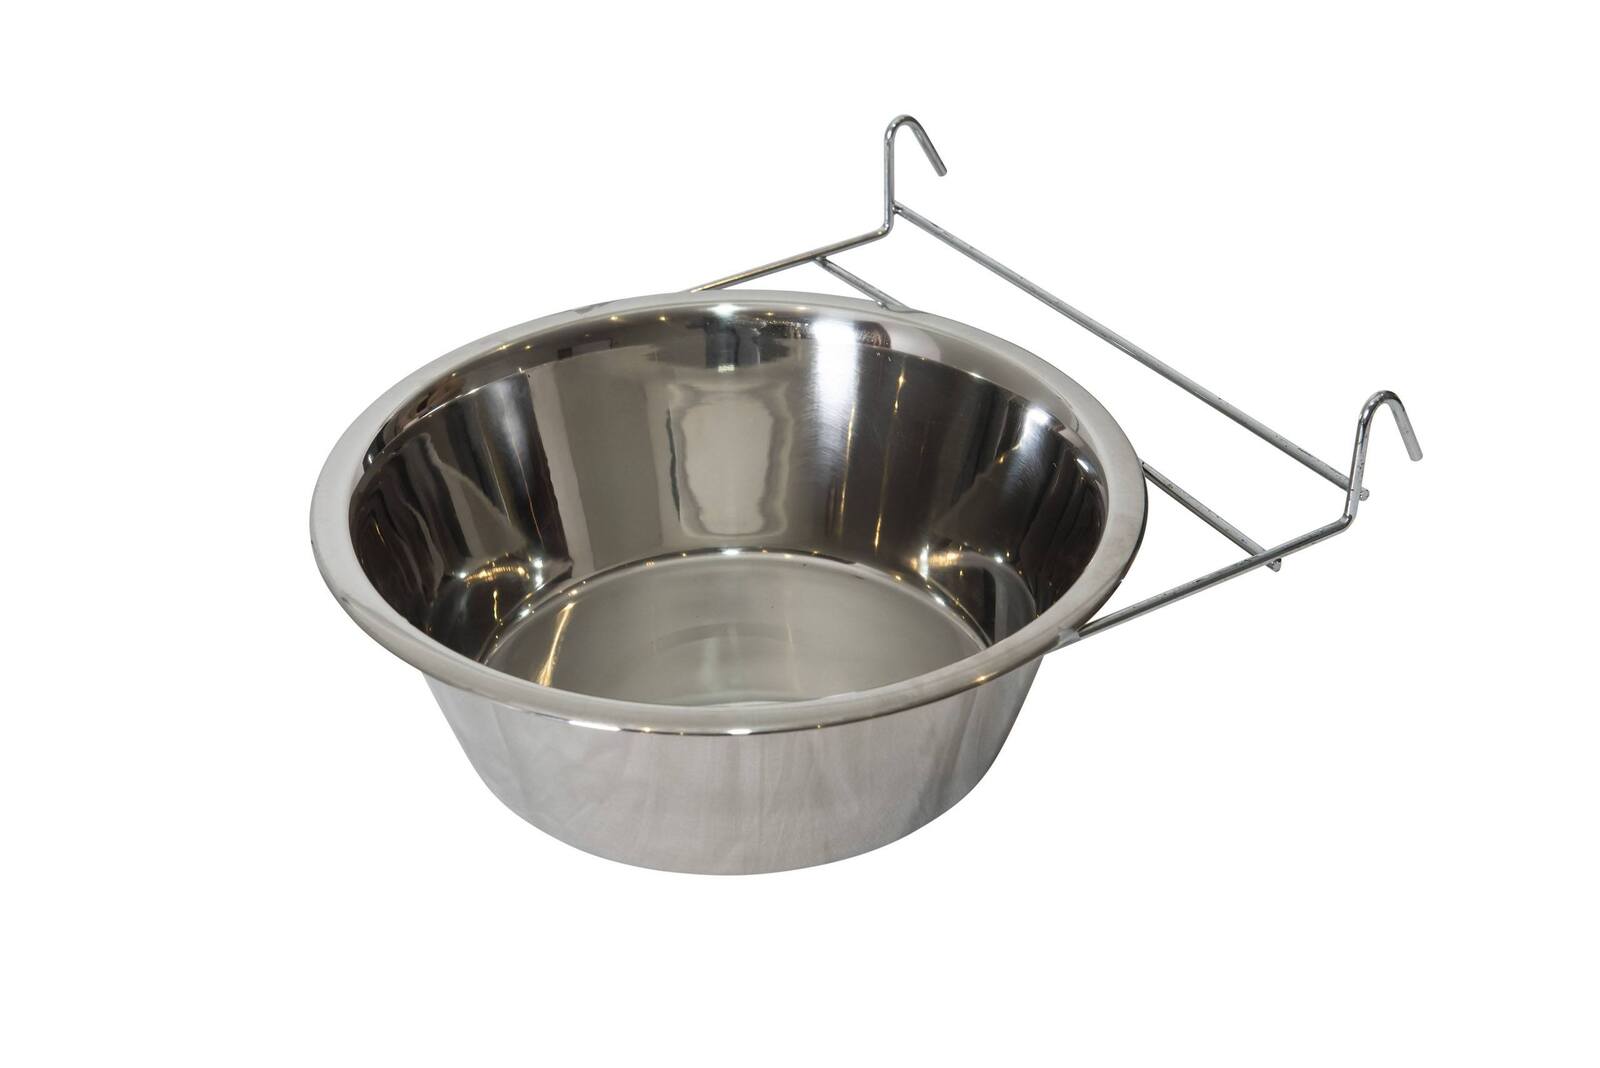 2 x Stainless Steel Pet Rabbit Bird Dog Cat Water Food Bowl Feeder Chicken Poultry Coop Cup 2800 mL